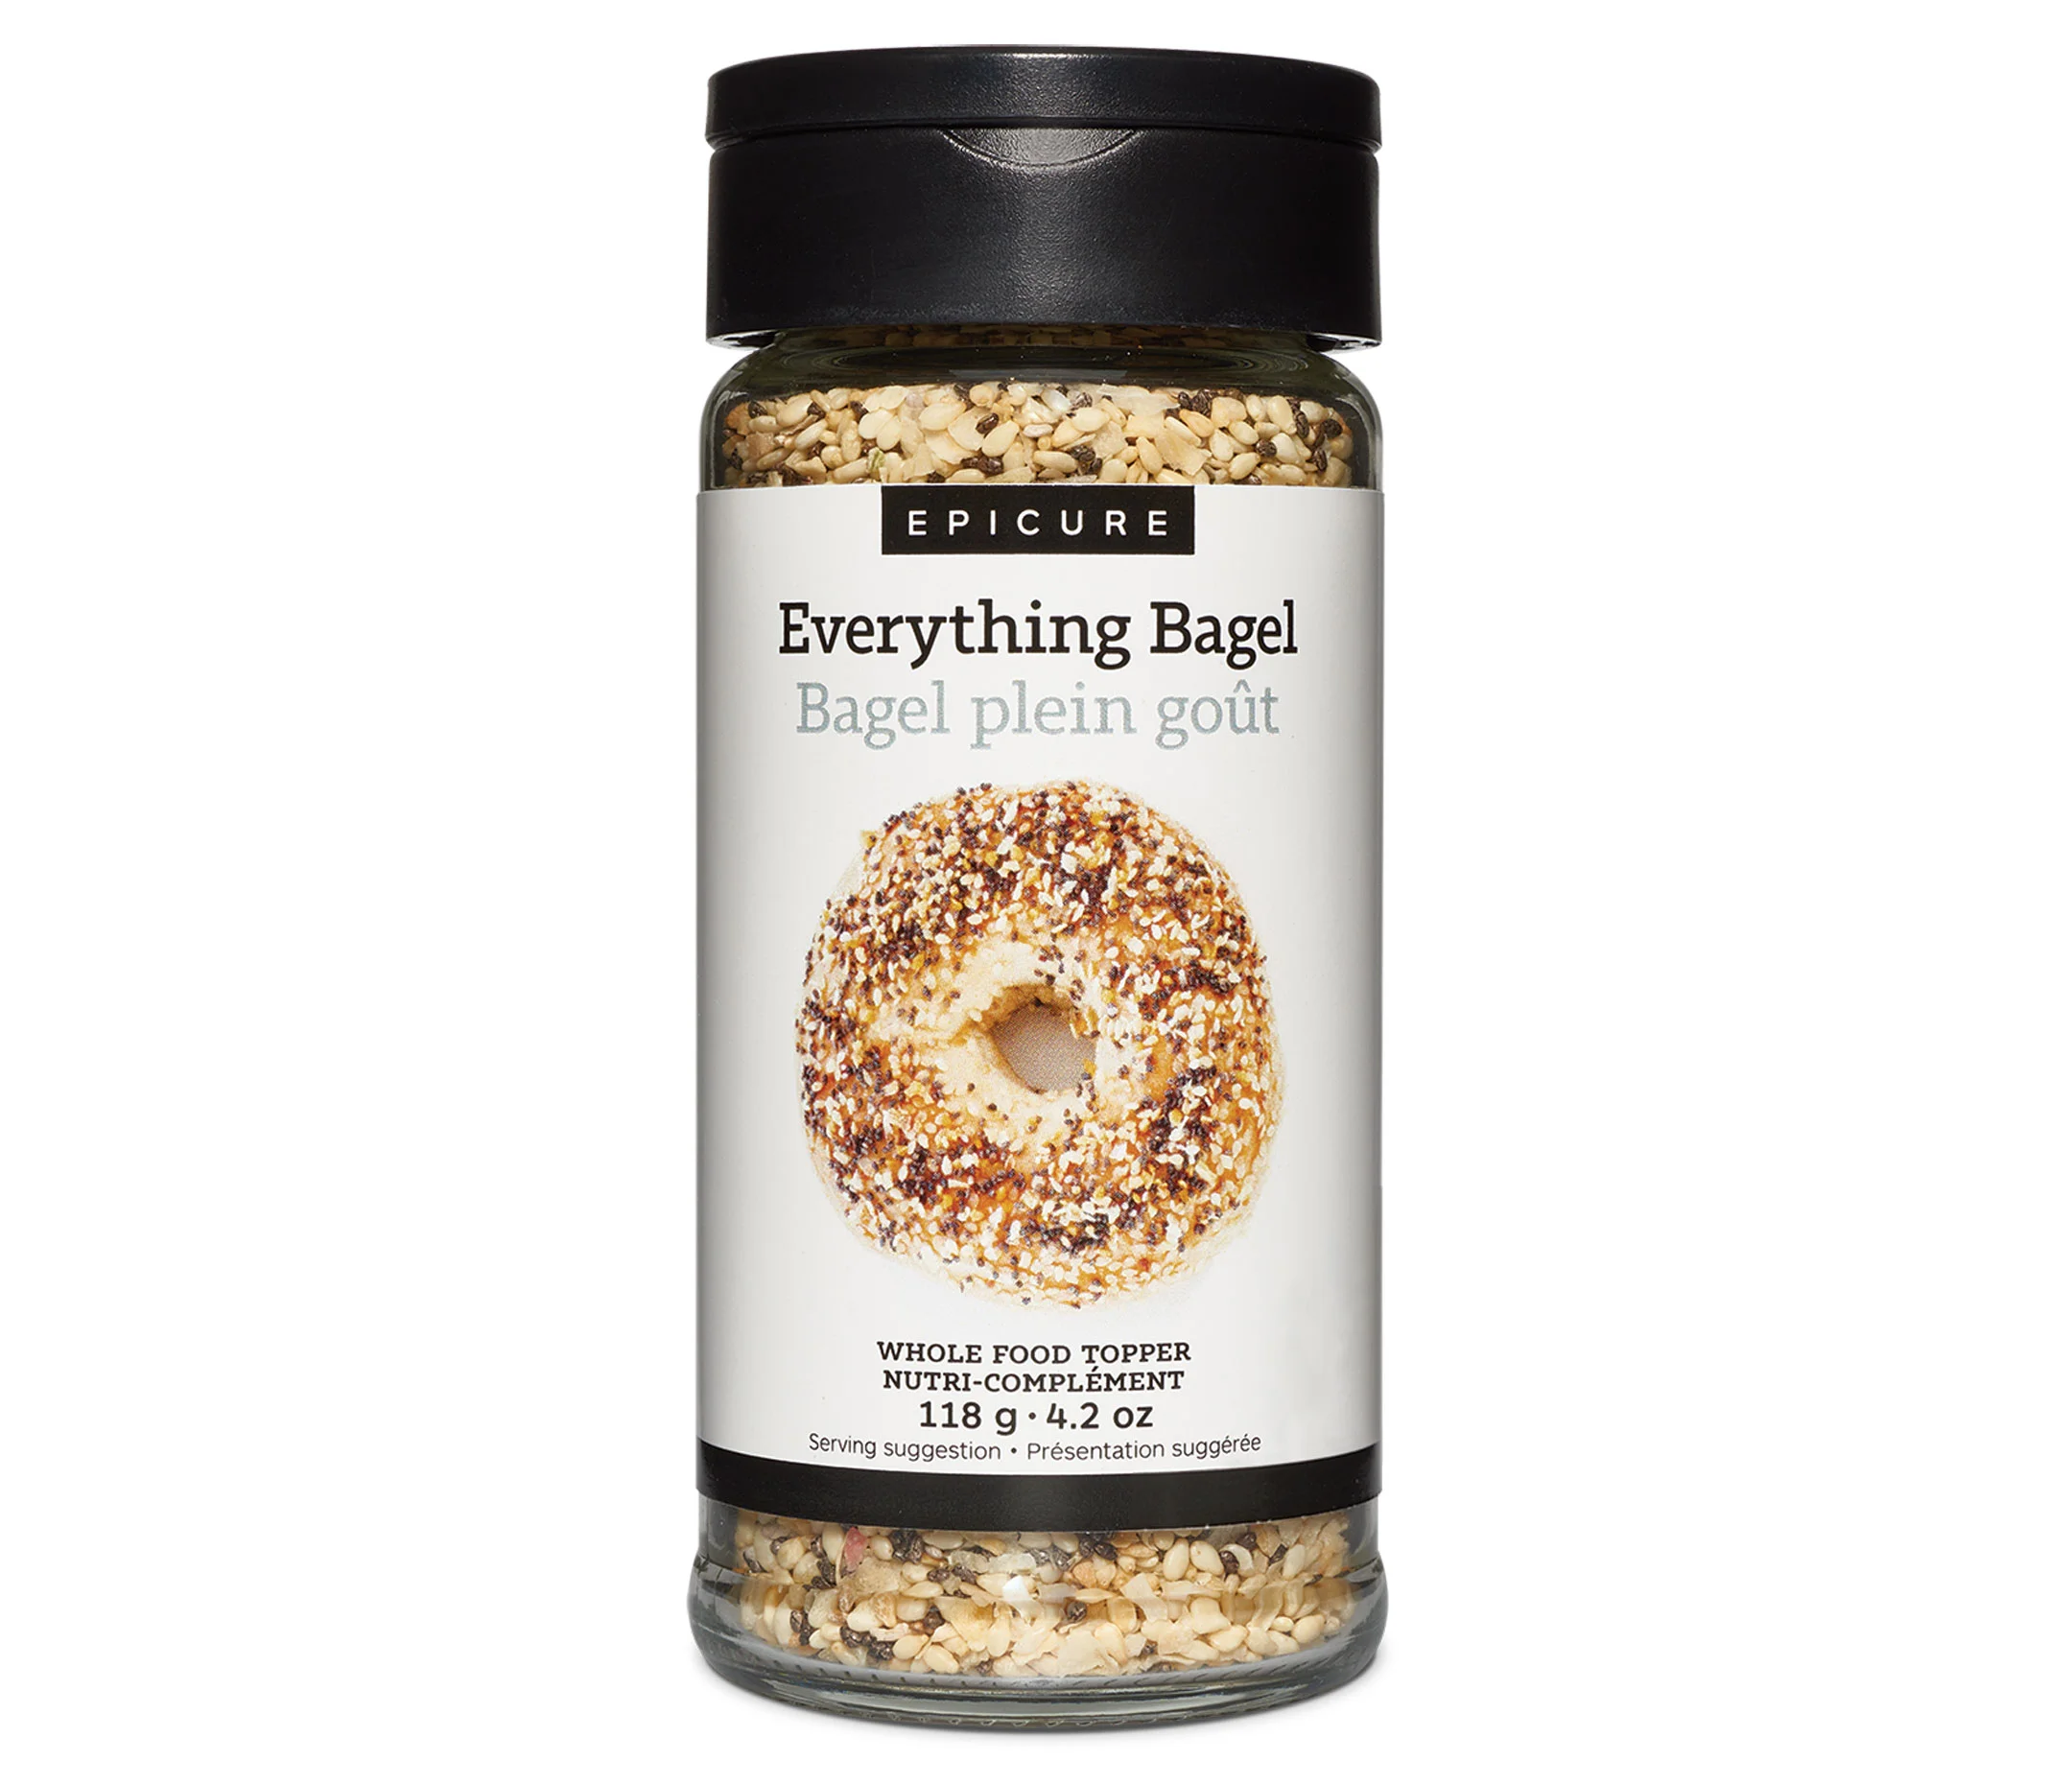 Everything Bagel Whole Food Topper